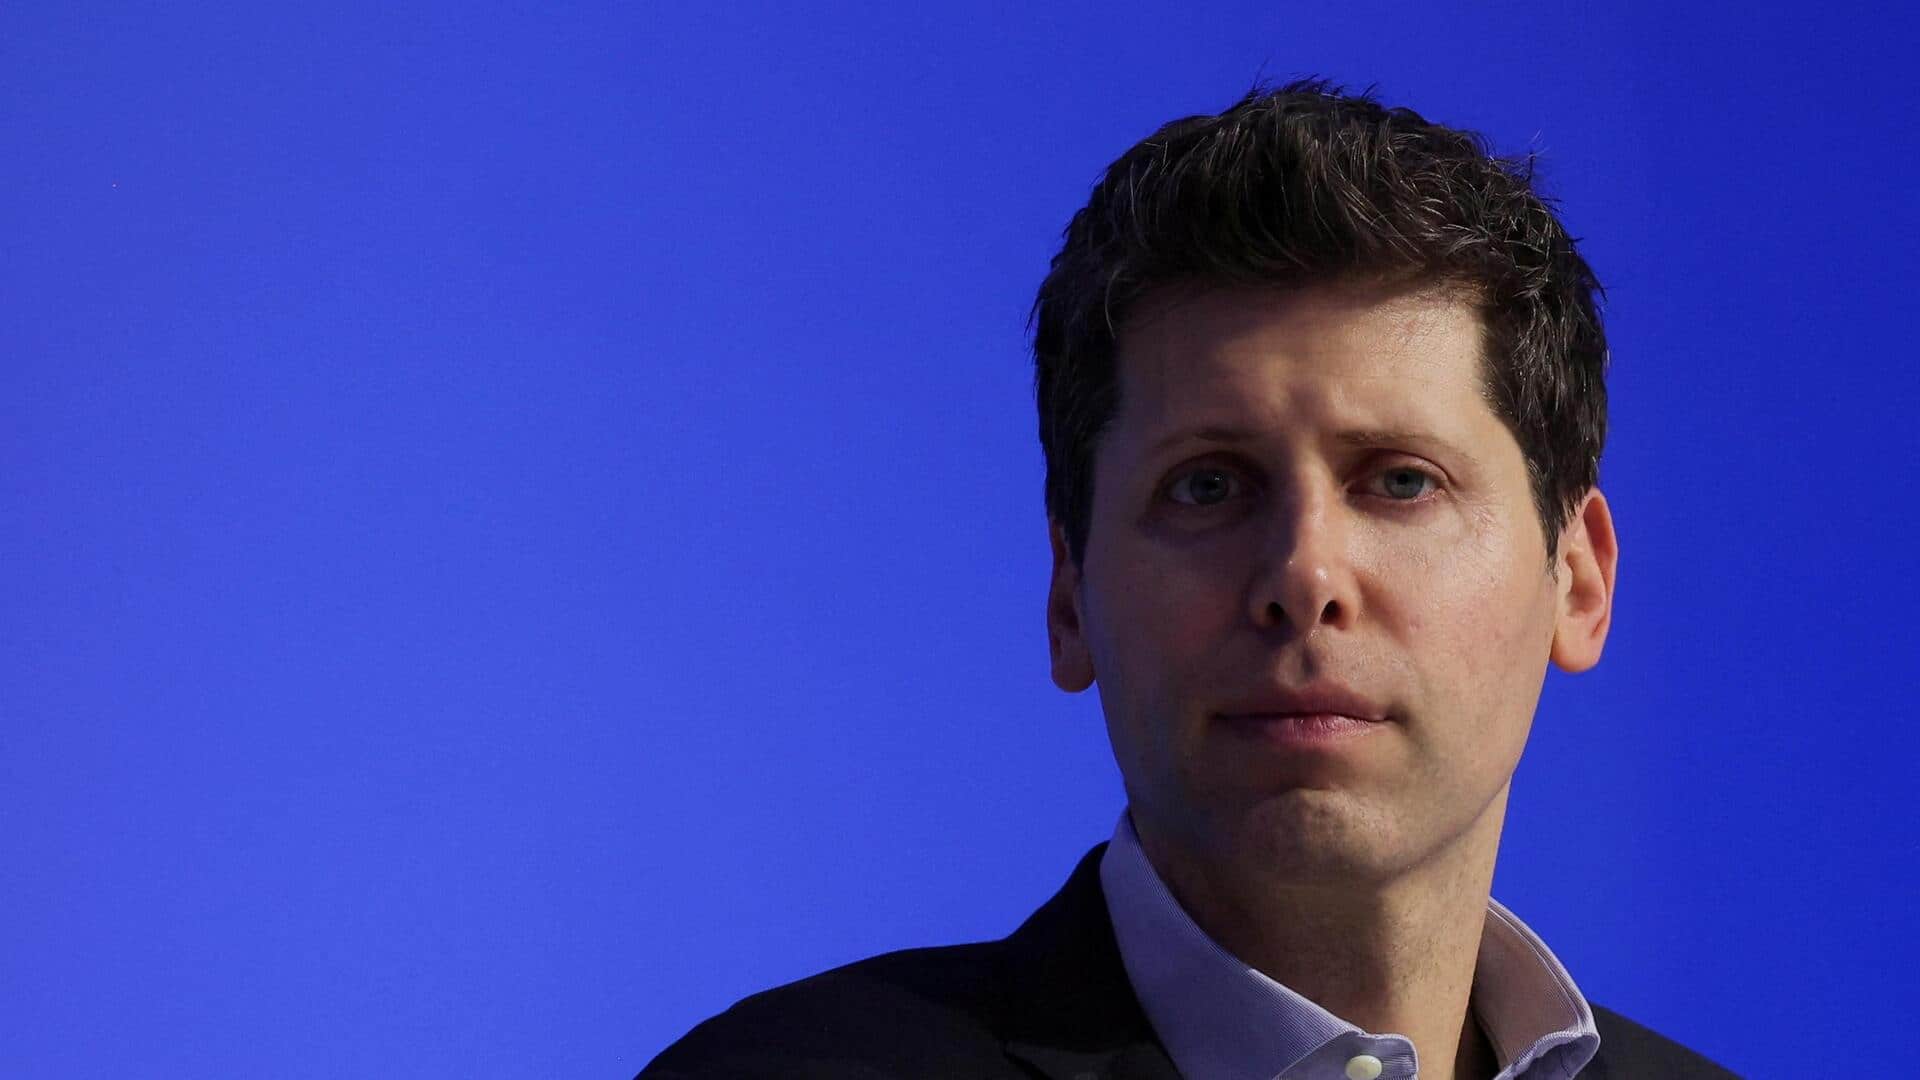 Sam Altman reappointed as CEO of OpenAI